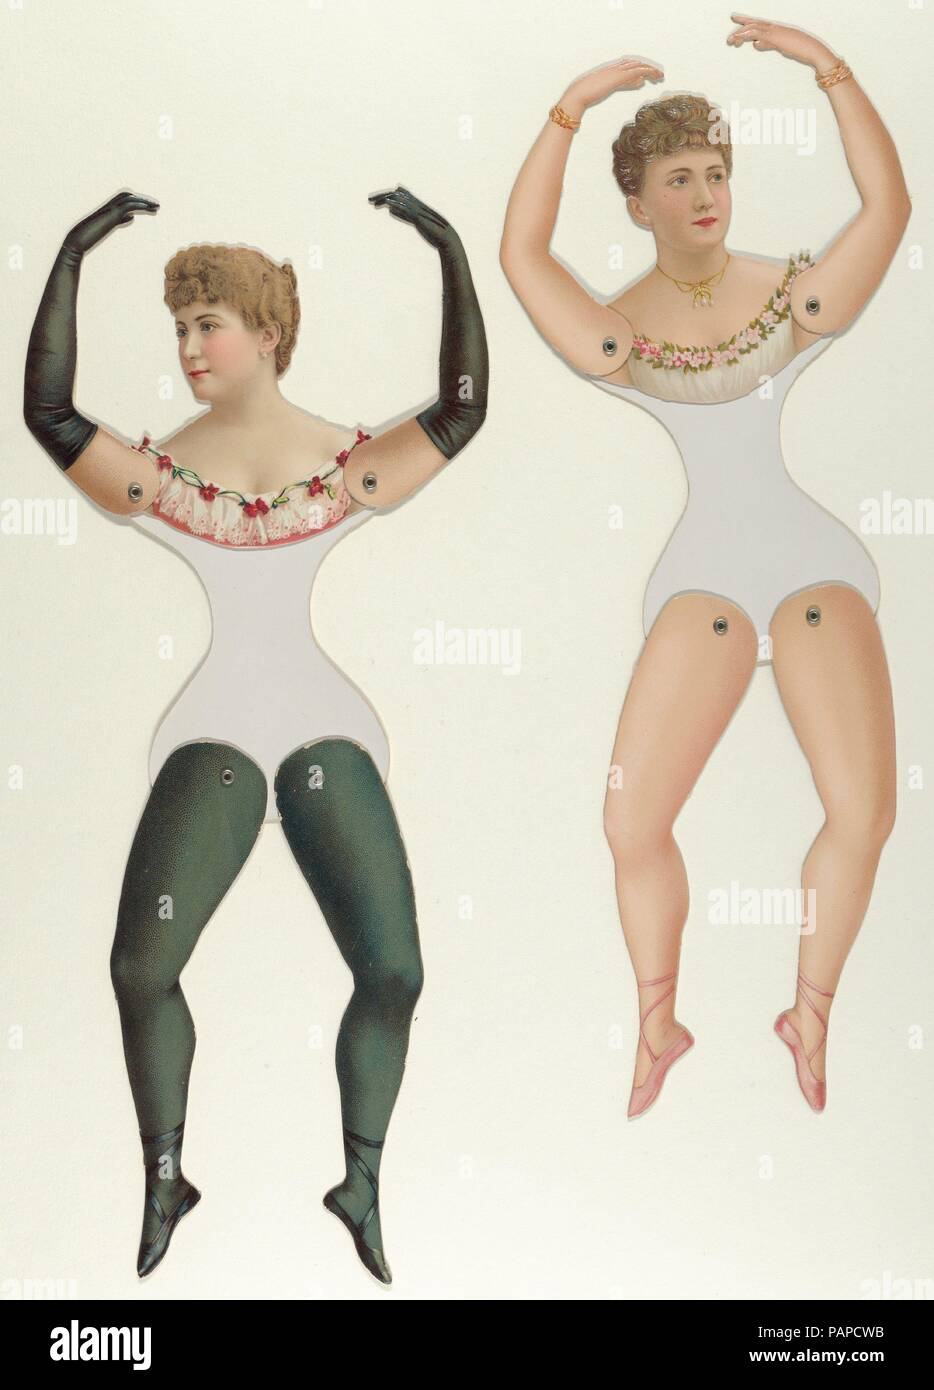 Ballerina and Bloomer Girls (Prima Donna) Paper Dolls. Dimensions: each: 14 3/8 × 6 1/8 in. (36.5 × 15.5 cm). Publisher: Littauer and Boysen. Purveyor: Dennison Manufacturing Co. (New York, NY). Date: 1890-1905. Museum: Metropolitan Museum of Art, New York, USA. Stock Photo